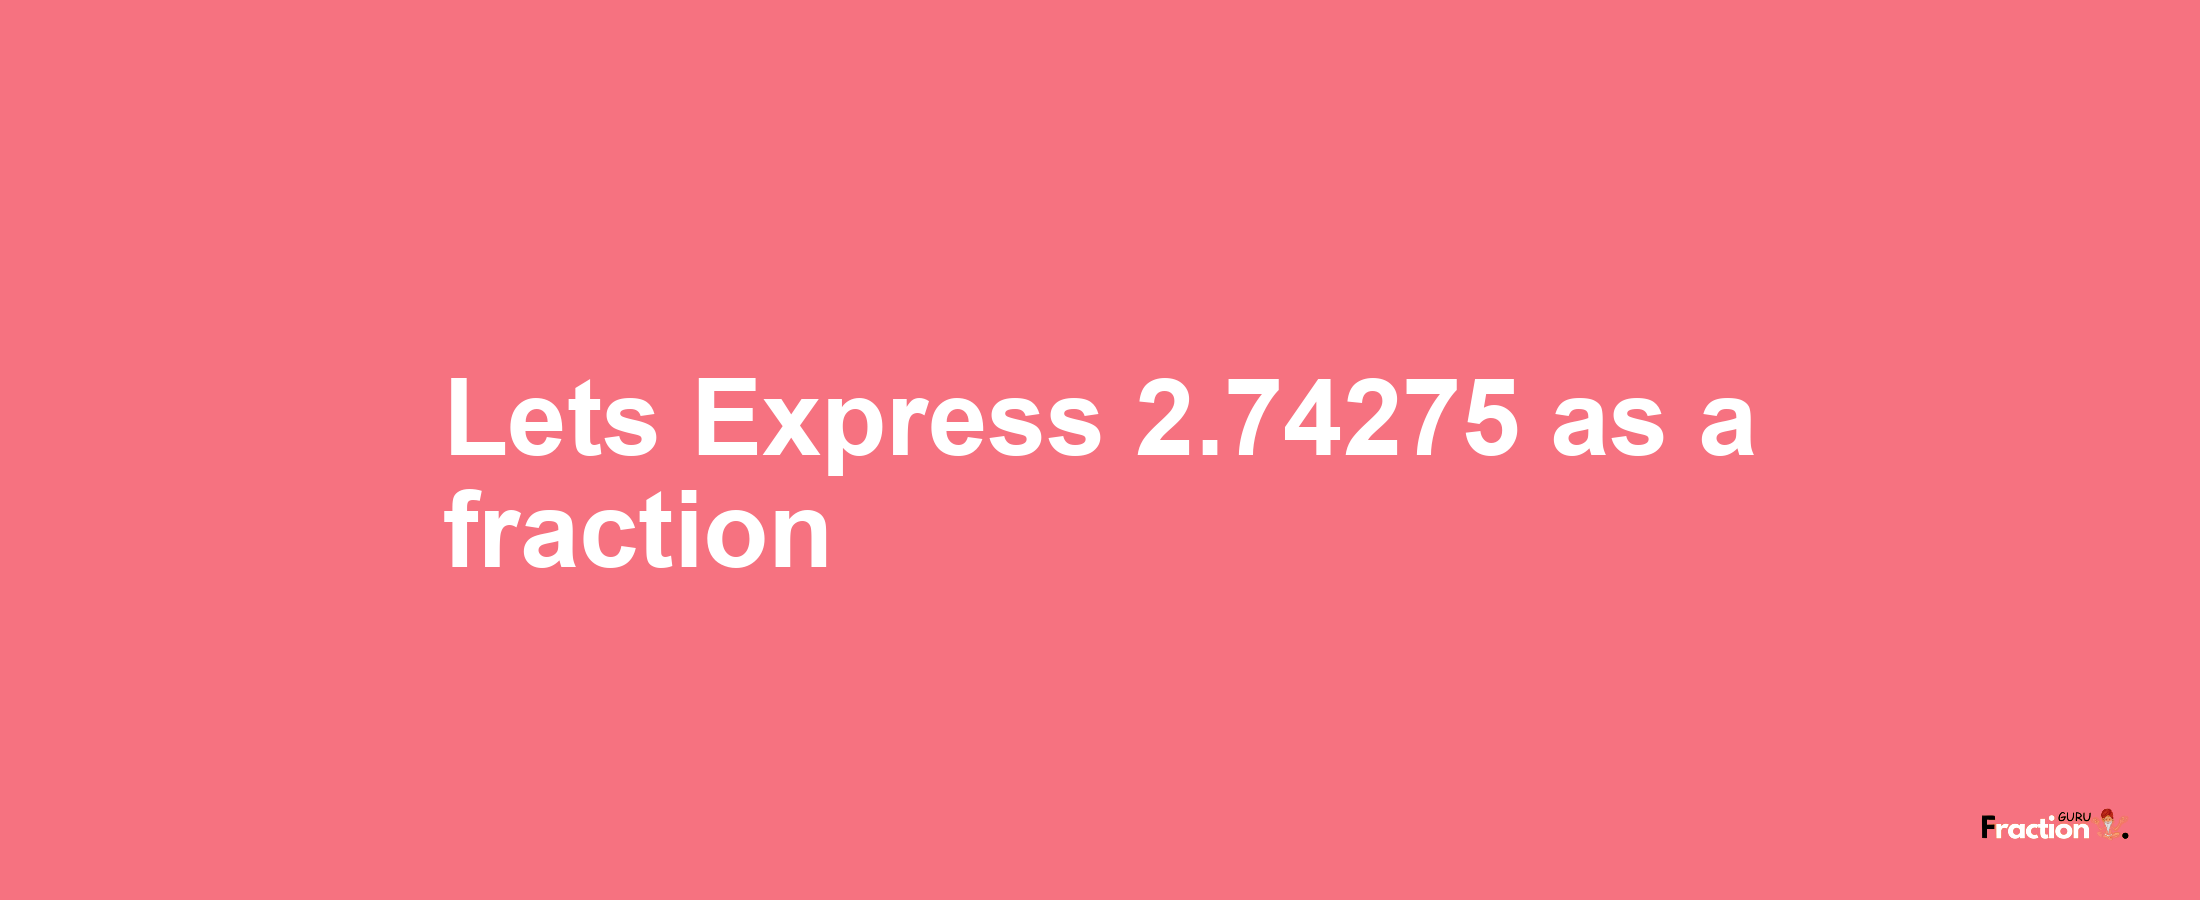 Lets Express 2.74275 as afraction